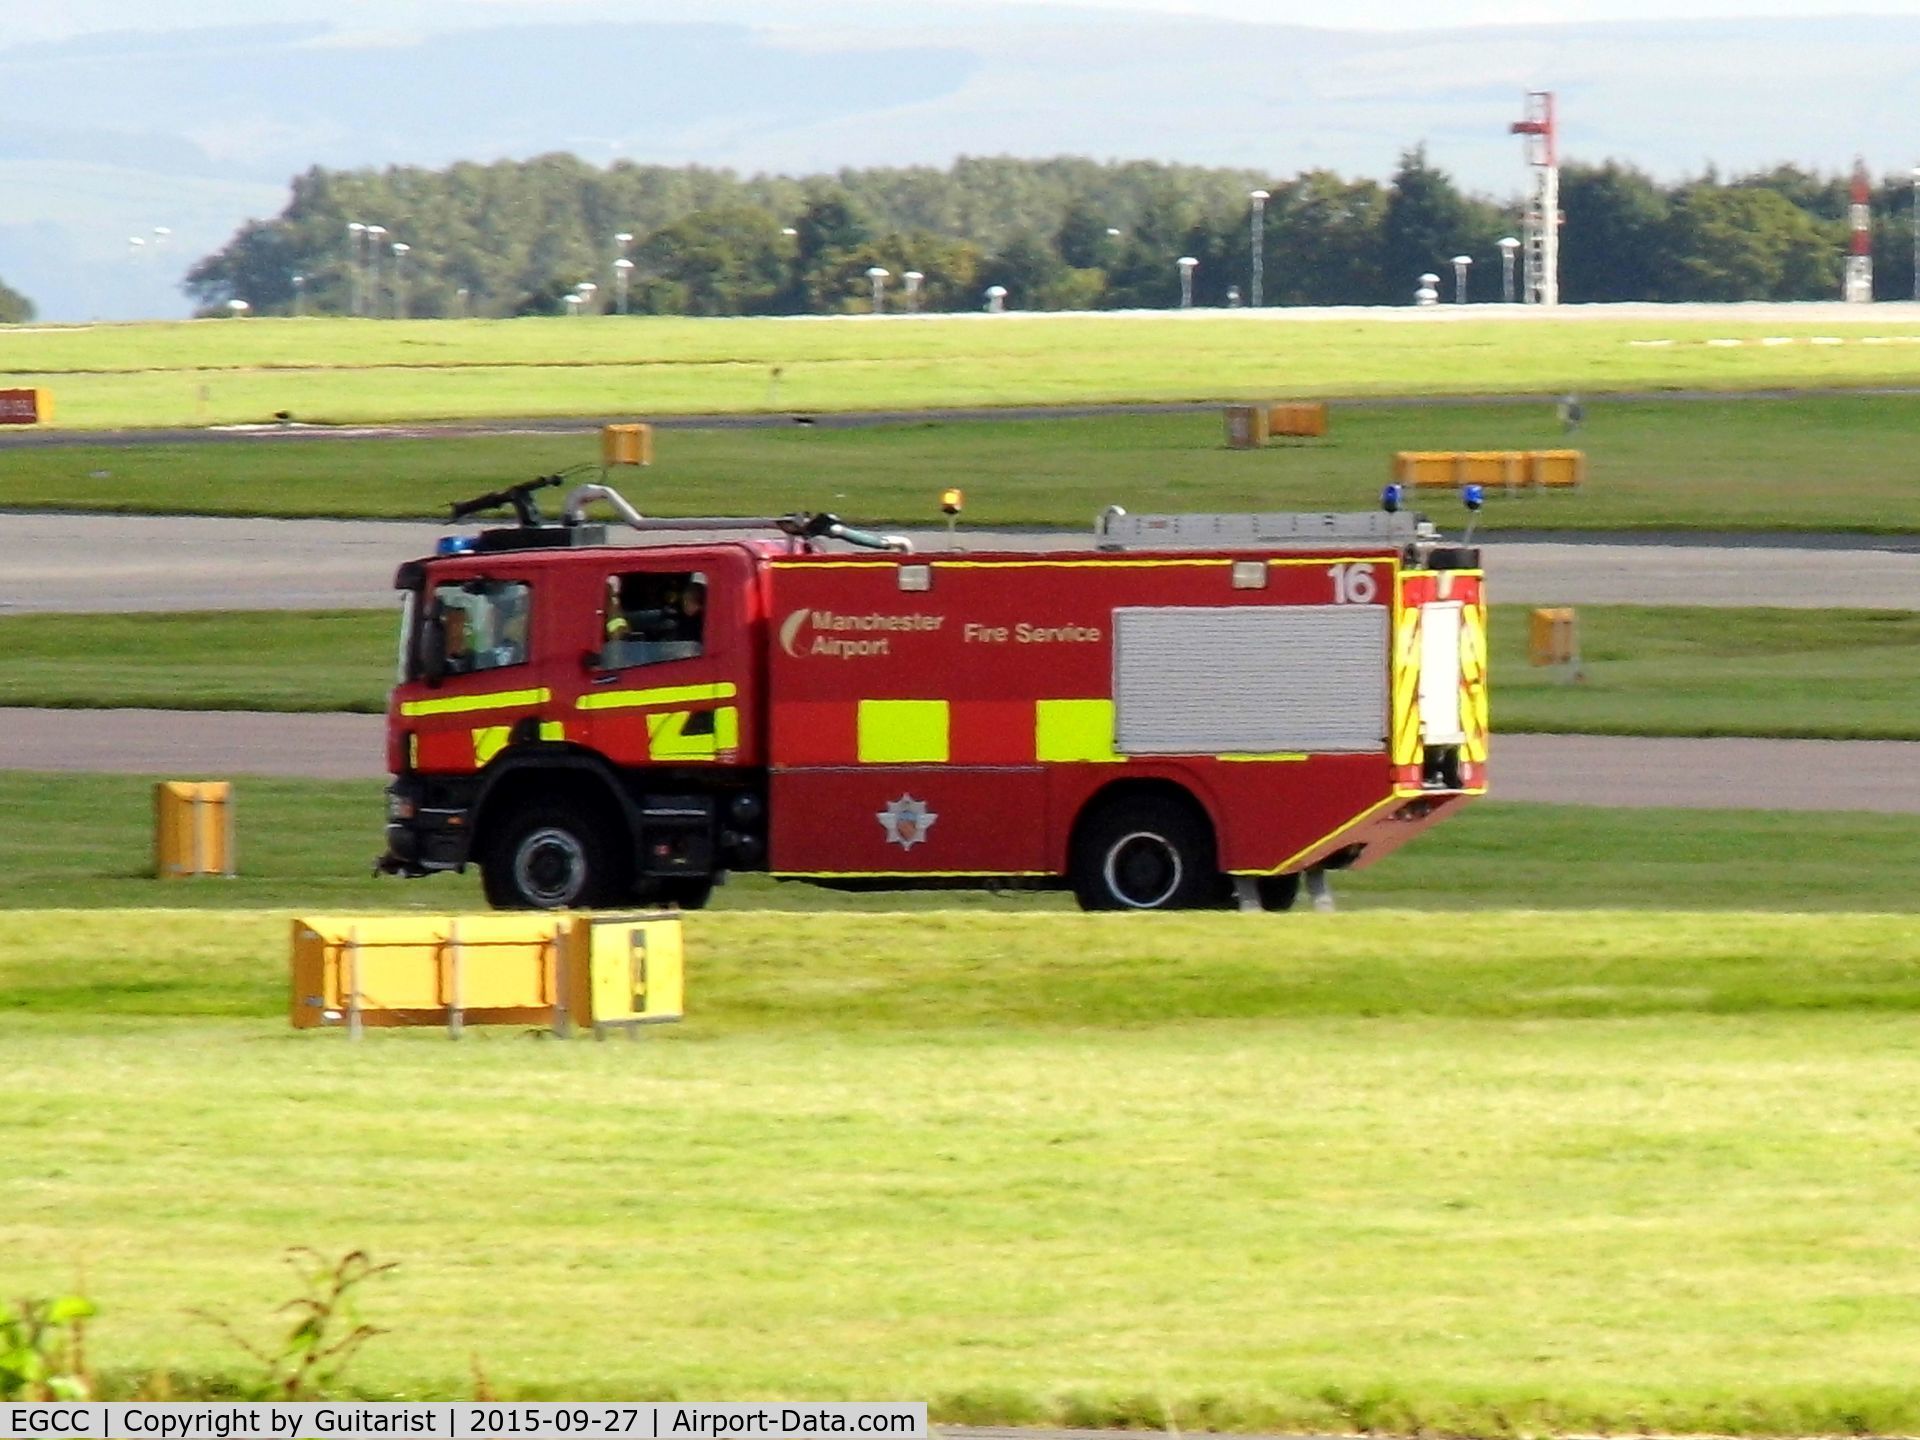 Manchester Airport, Manchester, England United Kingdom (EGCC) - Fire engine 16 at Manchester